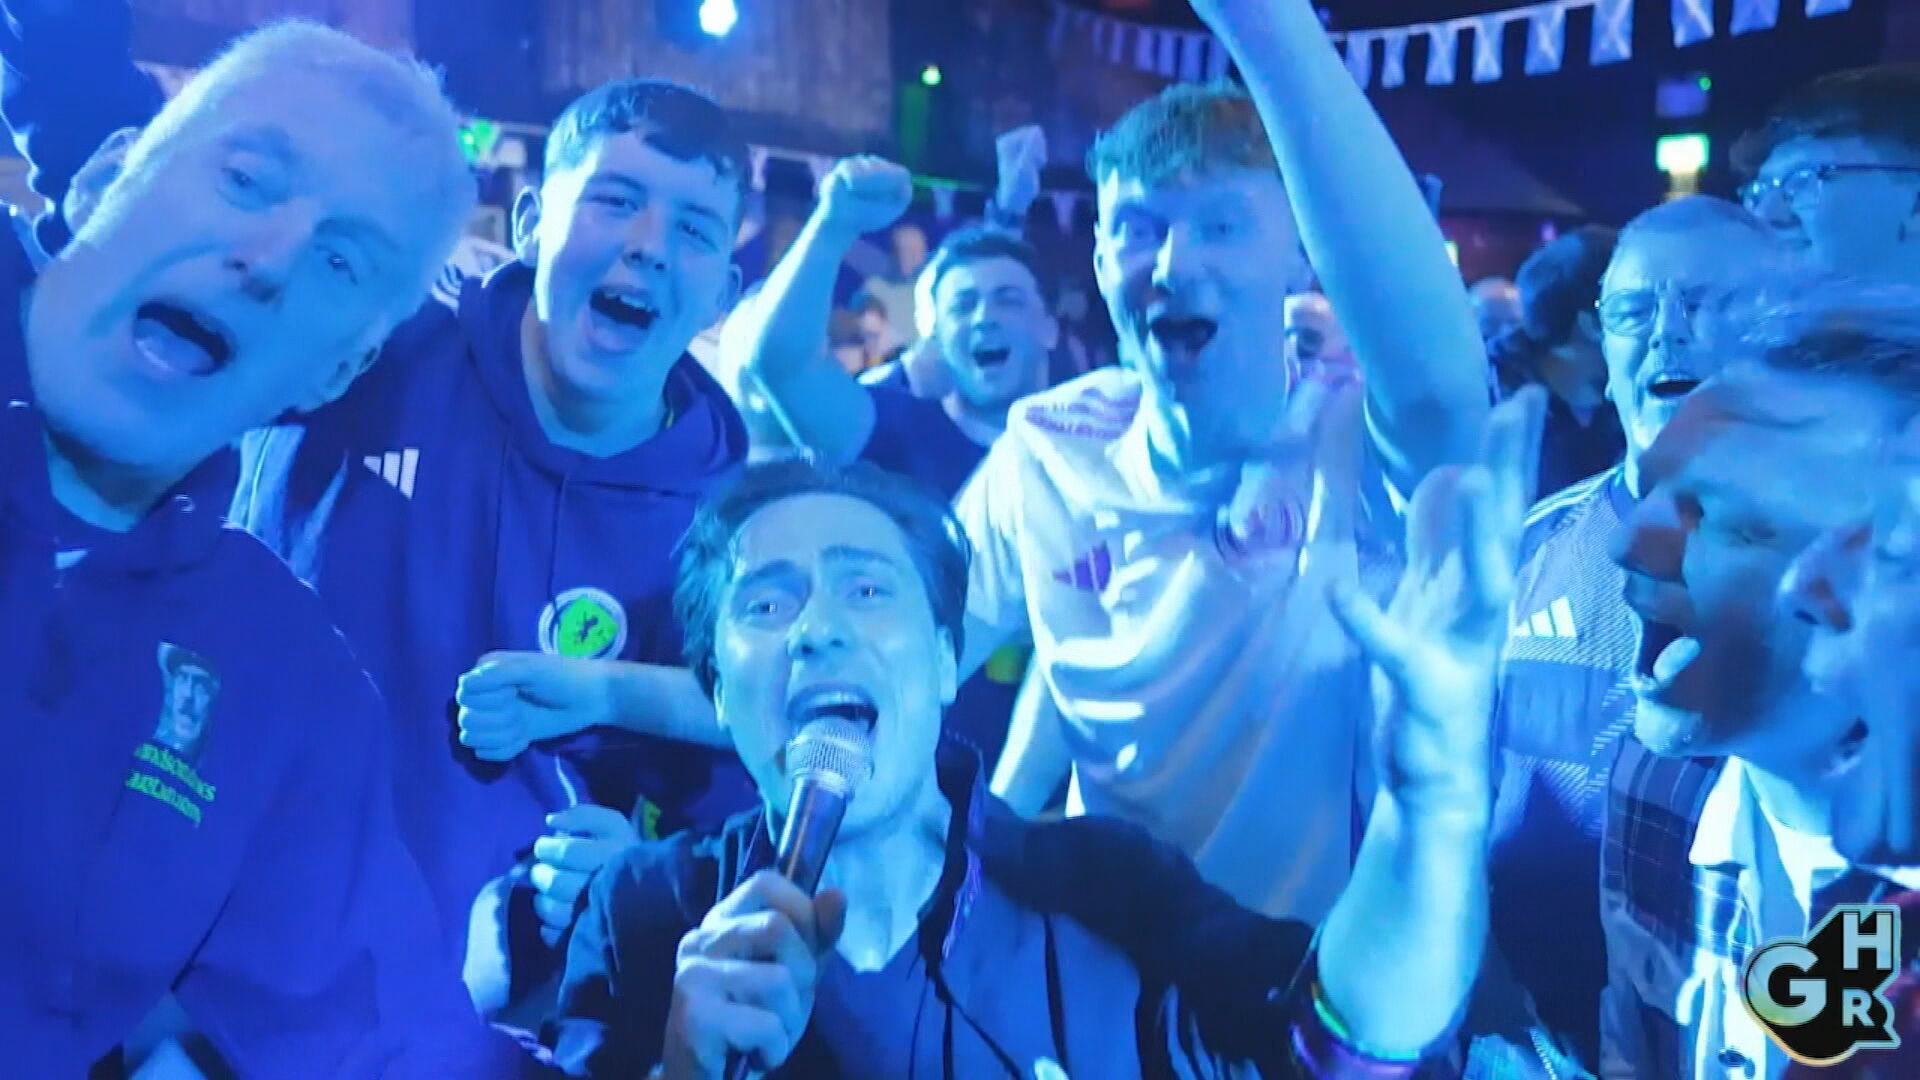 Scotland fans have lent their voice to charity single